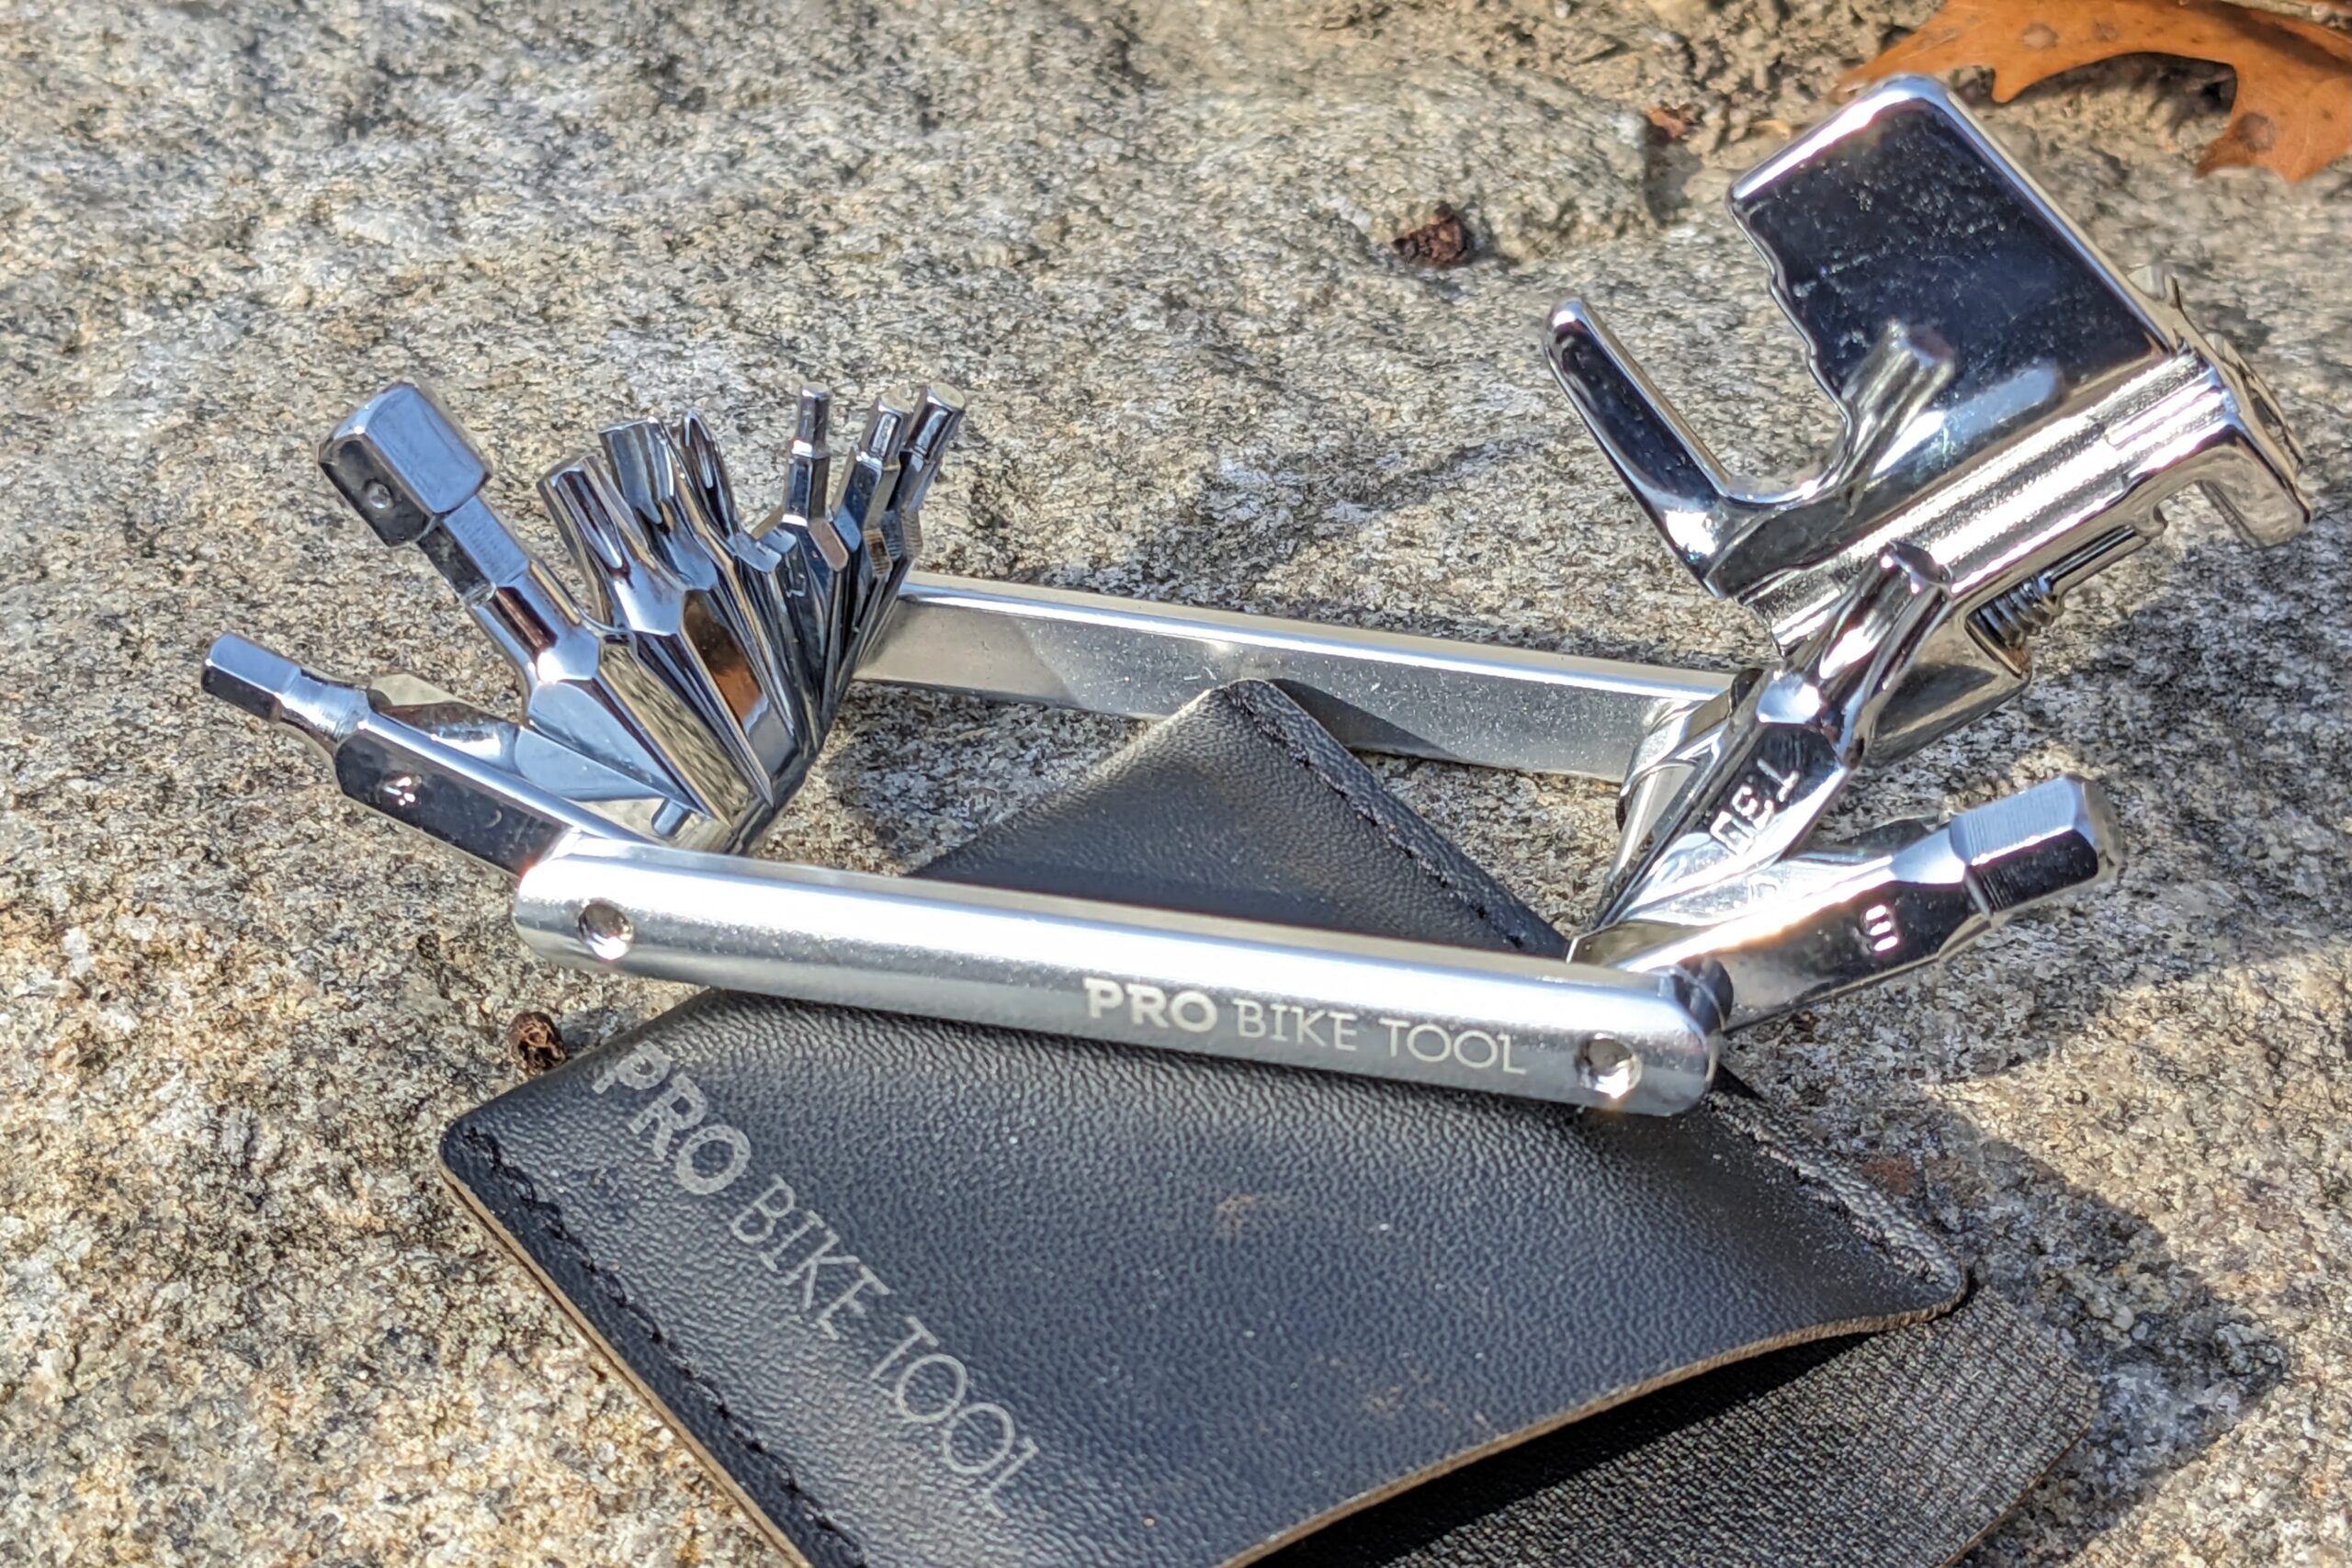 A close-up look at the Pro Bike Tool 20-in-1 bike multi-tool and all its functions